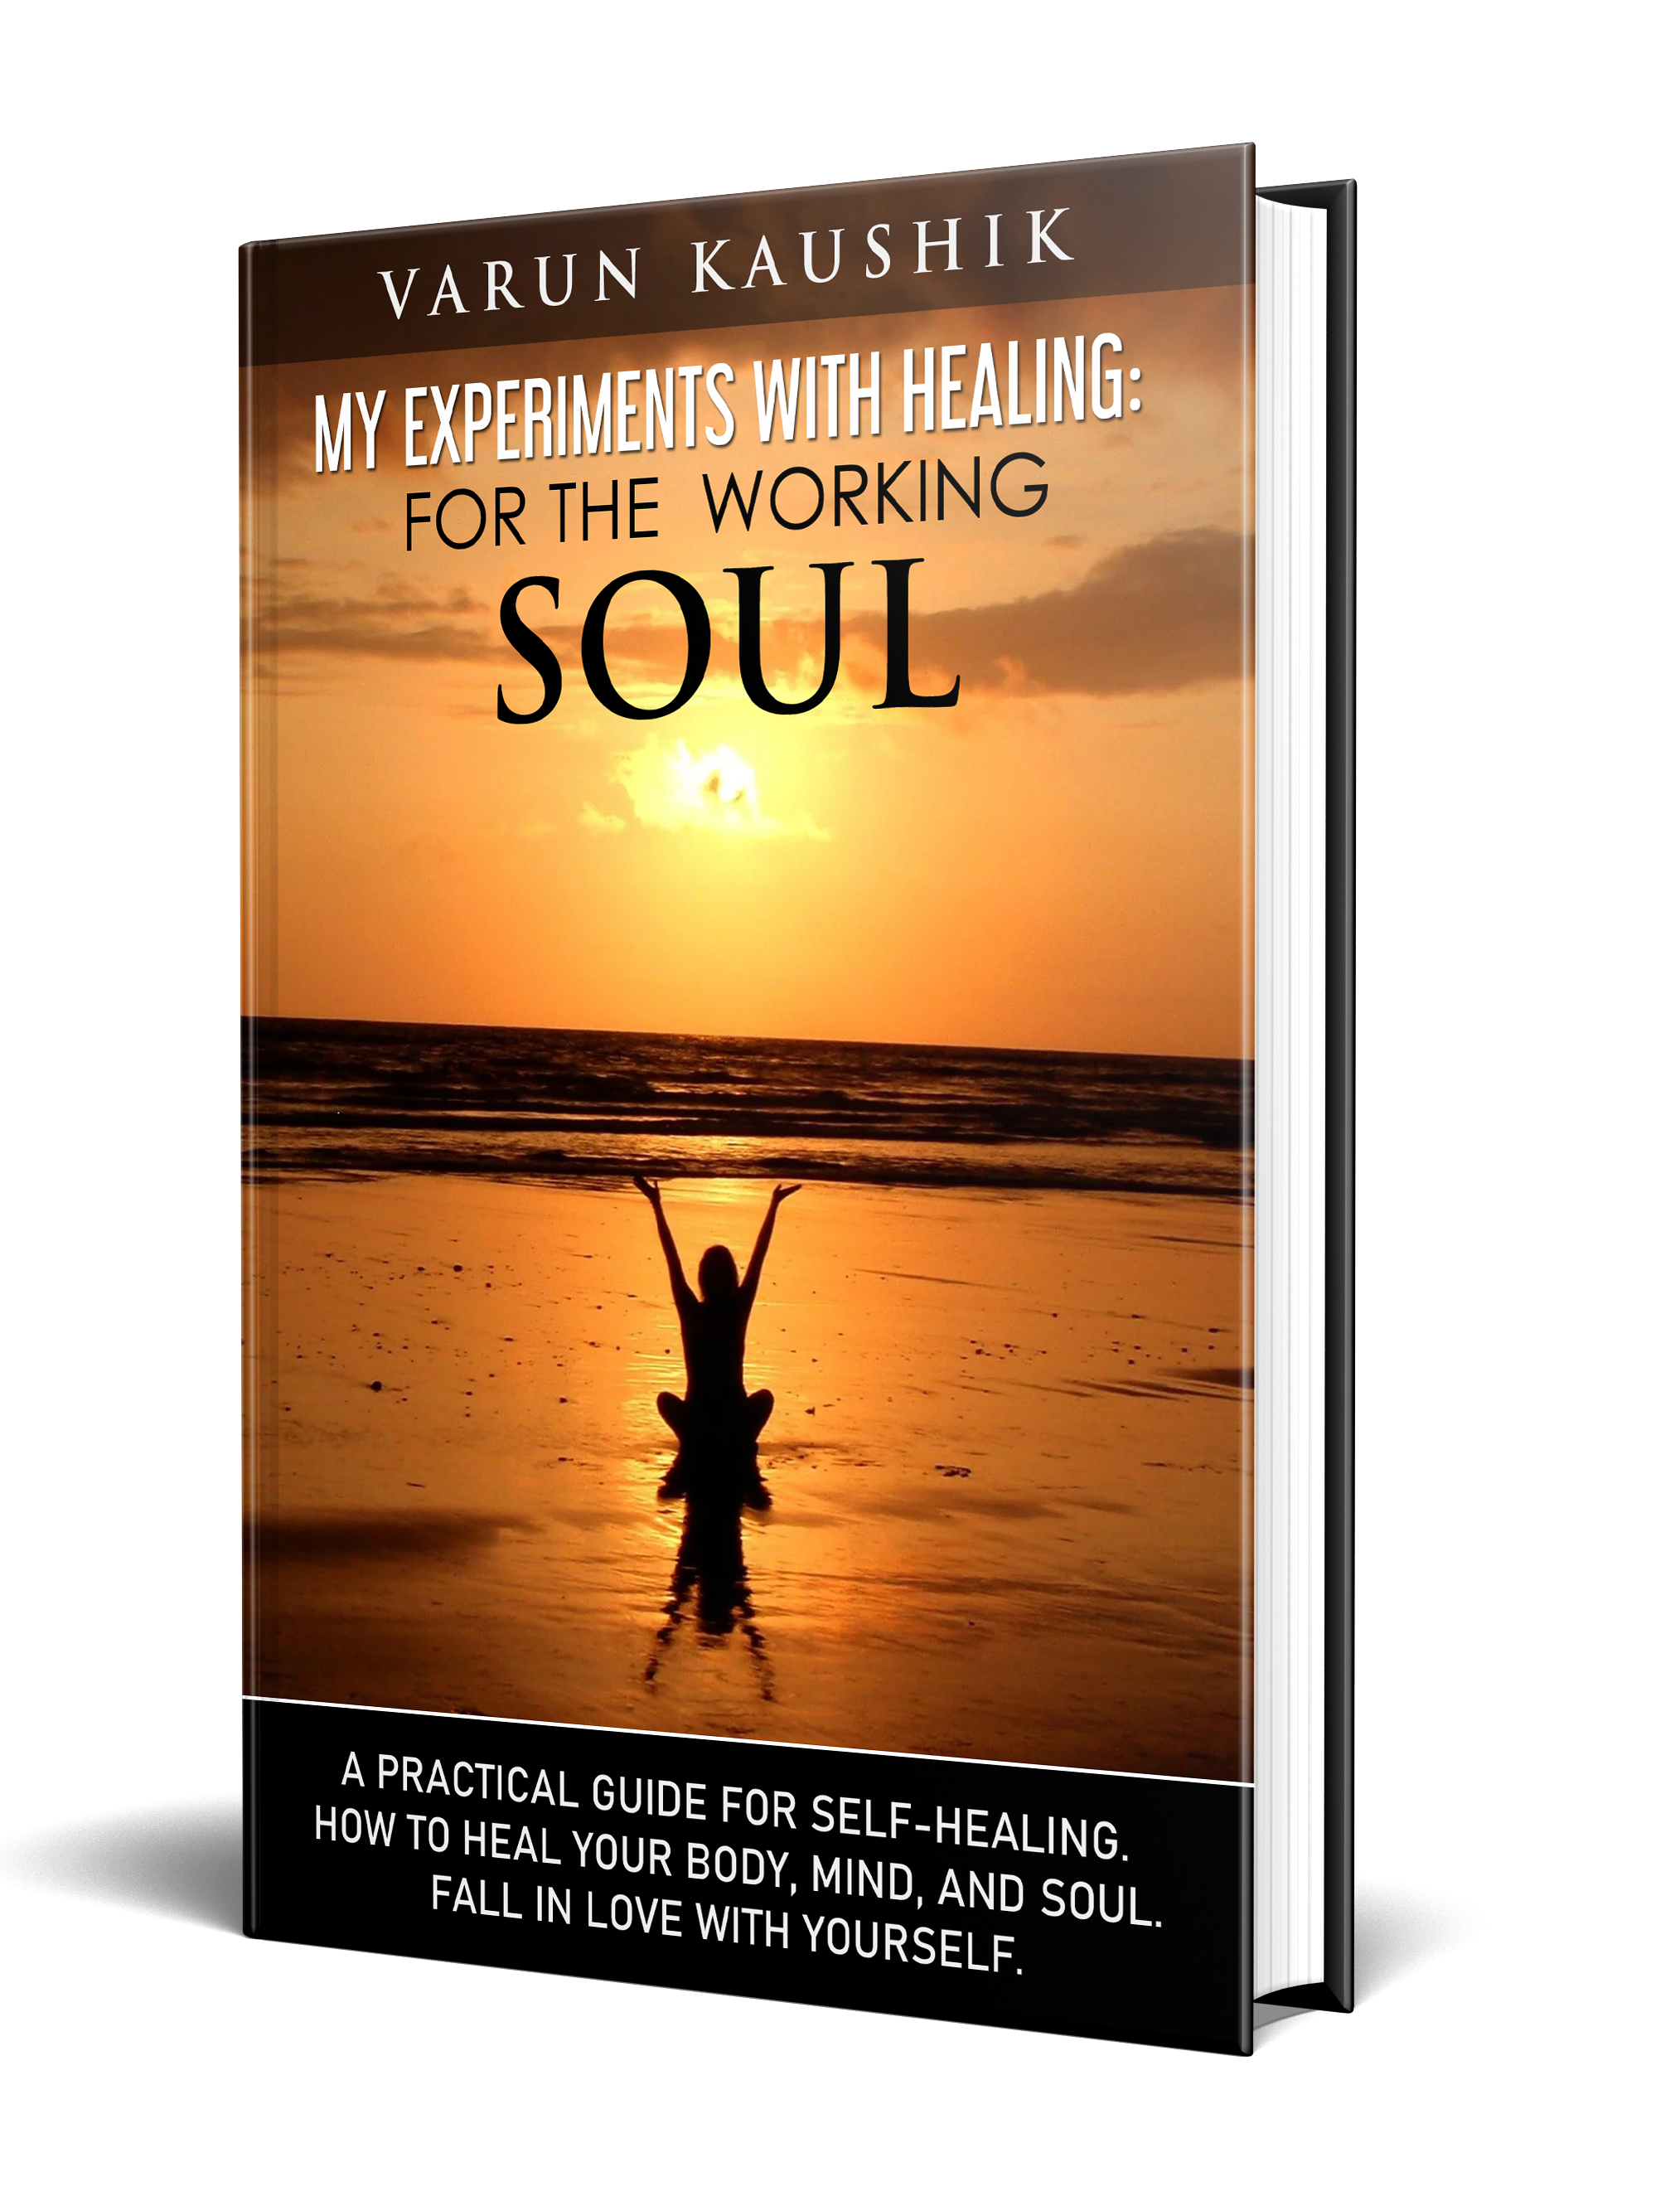 FREE: MY EXPERIMENTS WITH HEALING: FOR THE WORKING SOUL by VARUN KAUSHIK